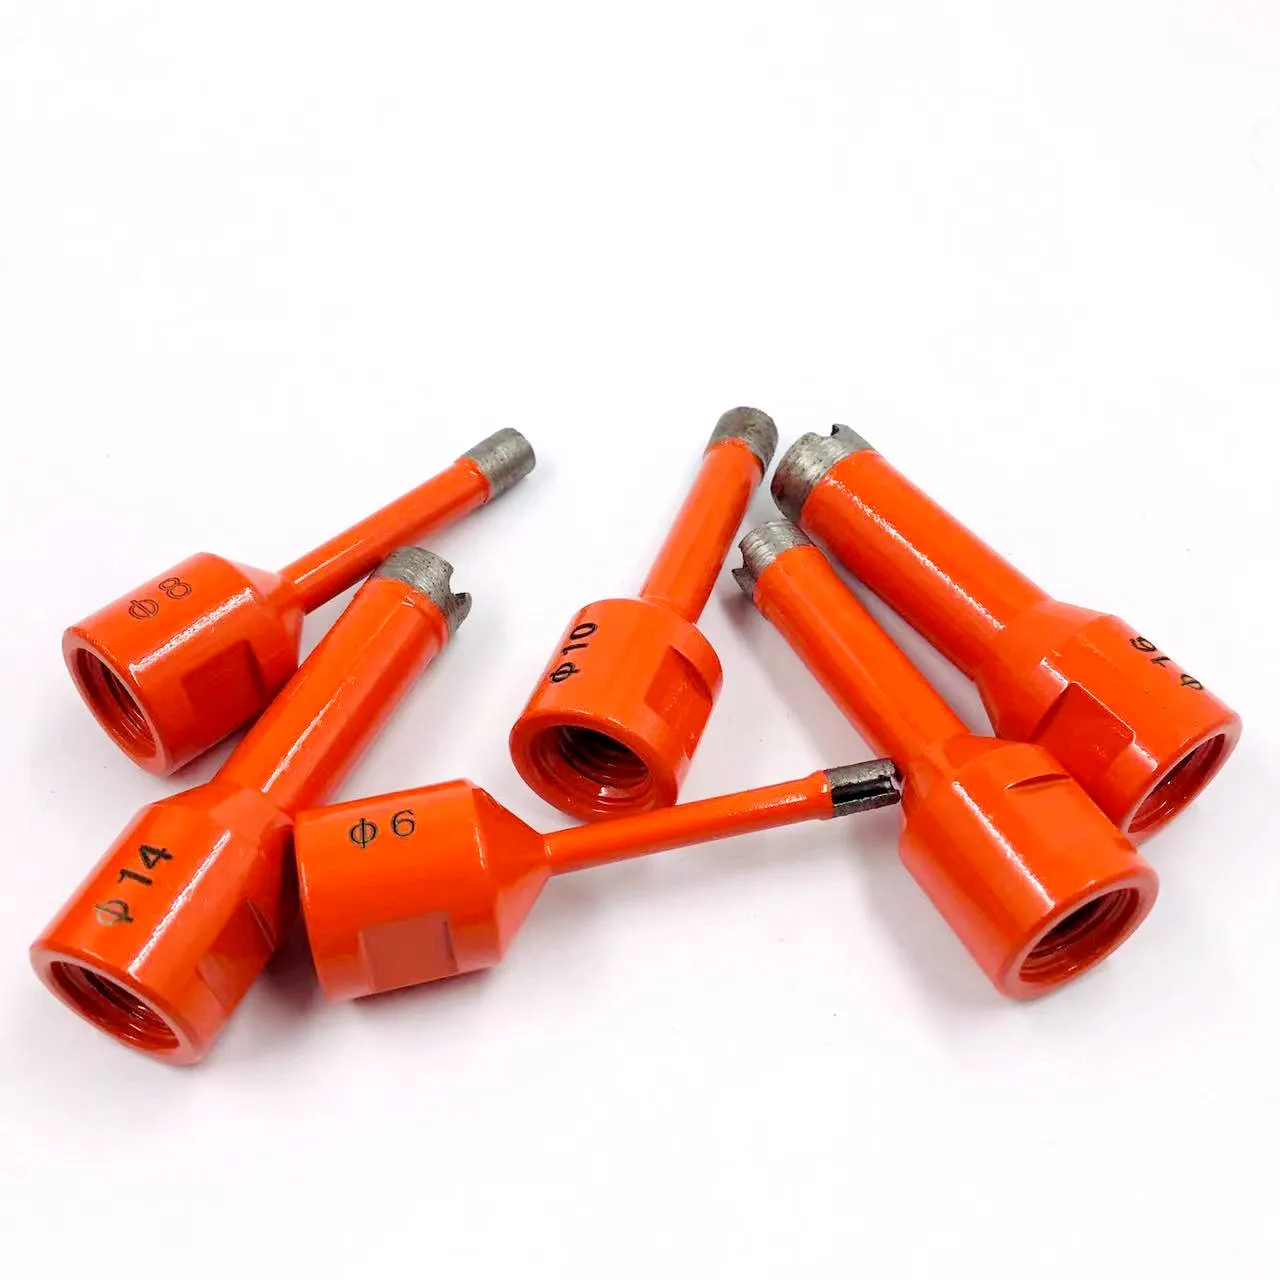 M14 thread angle grinder 6-16mm sintered core bit diamond hole saw bit for drilling marble granite tile ceramic concrete 1pc 6 16mm m14 brazed diamond drill bits hole saw opener cutter tile marble concrete drilling for grinder power tools accessory